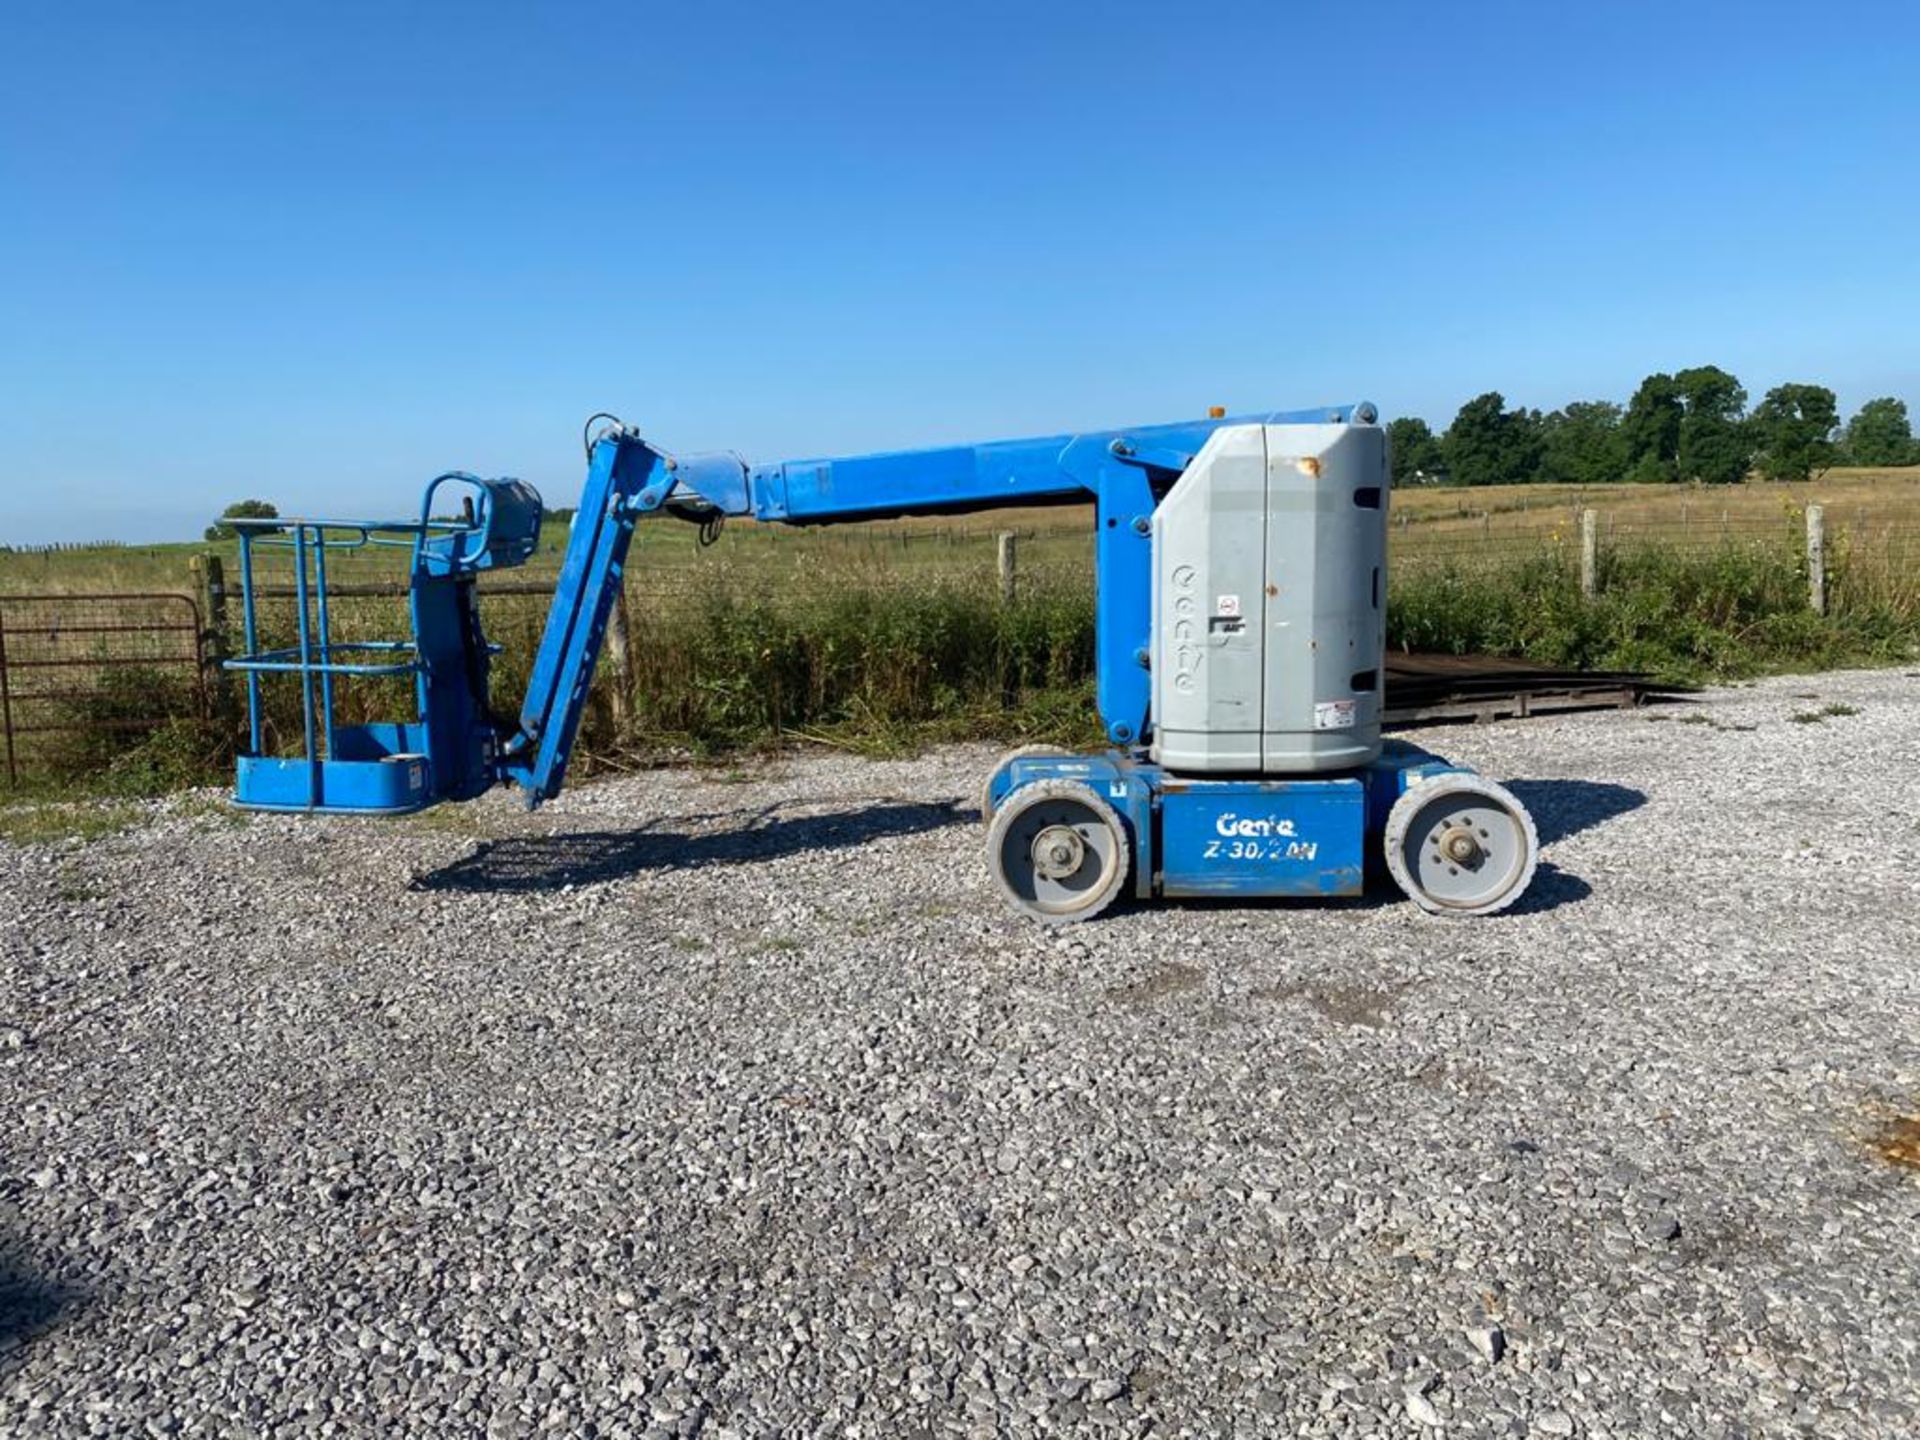 MINT 2006 Genie Boom Lift model Z-30/20J with 30' high and 21' Reach - Image 2 of 2